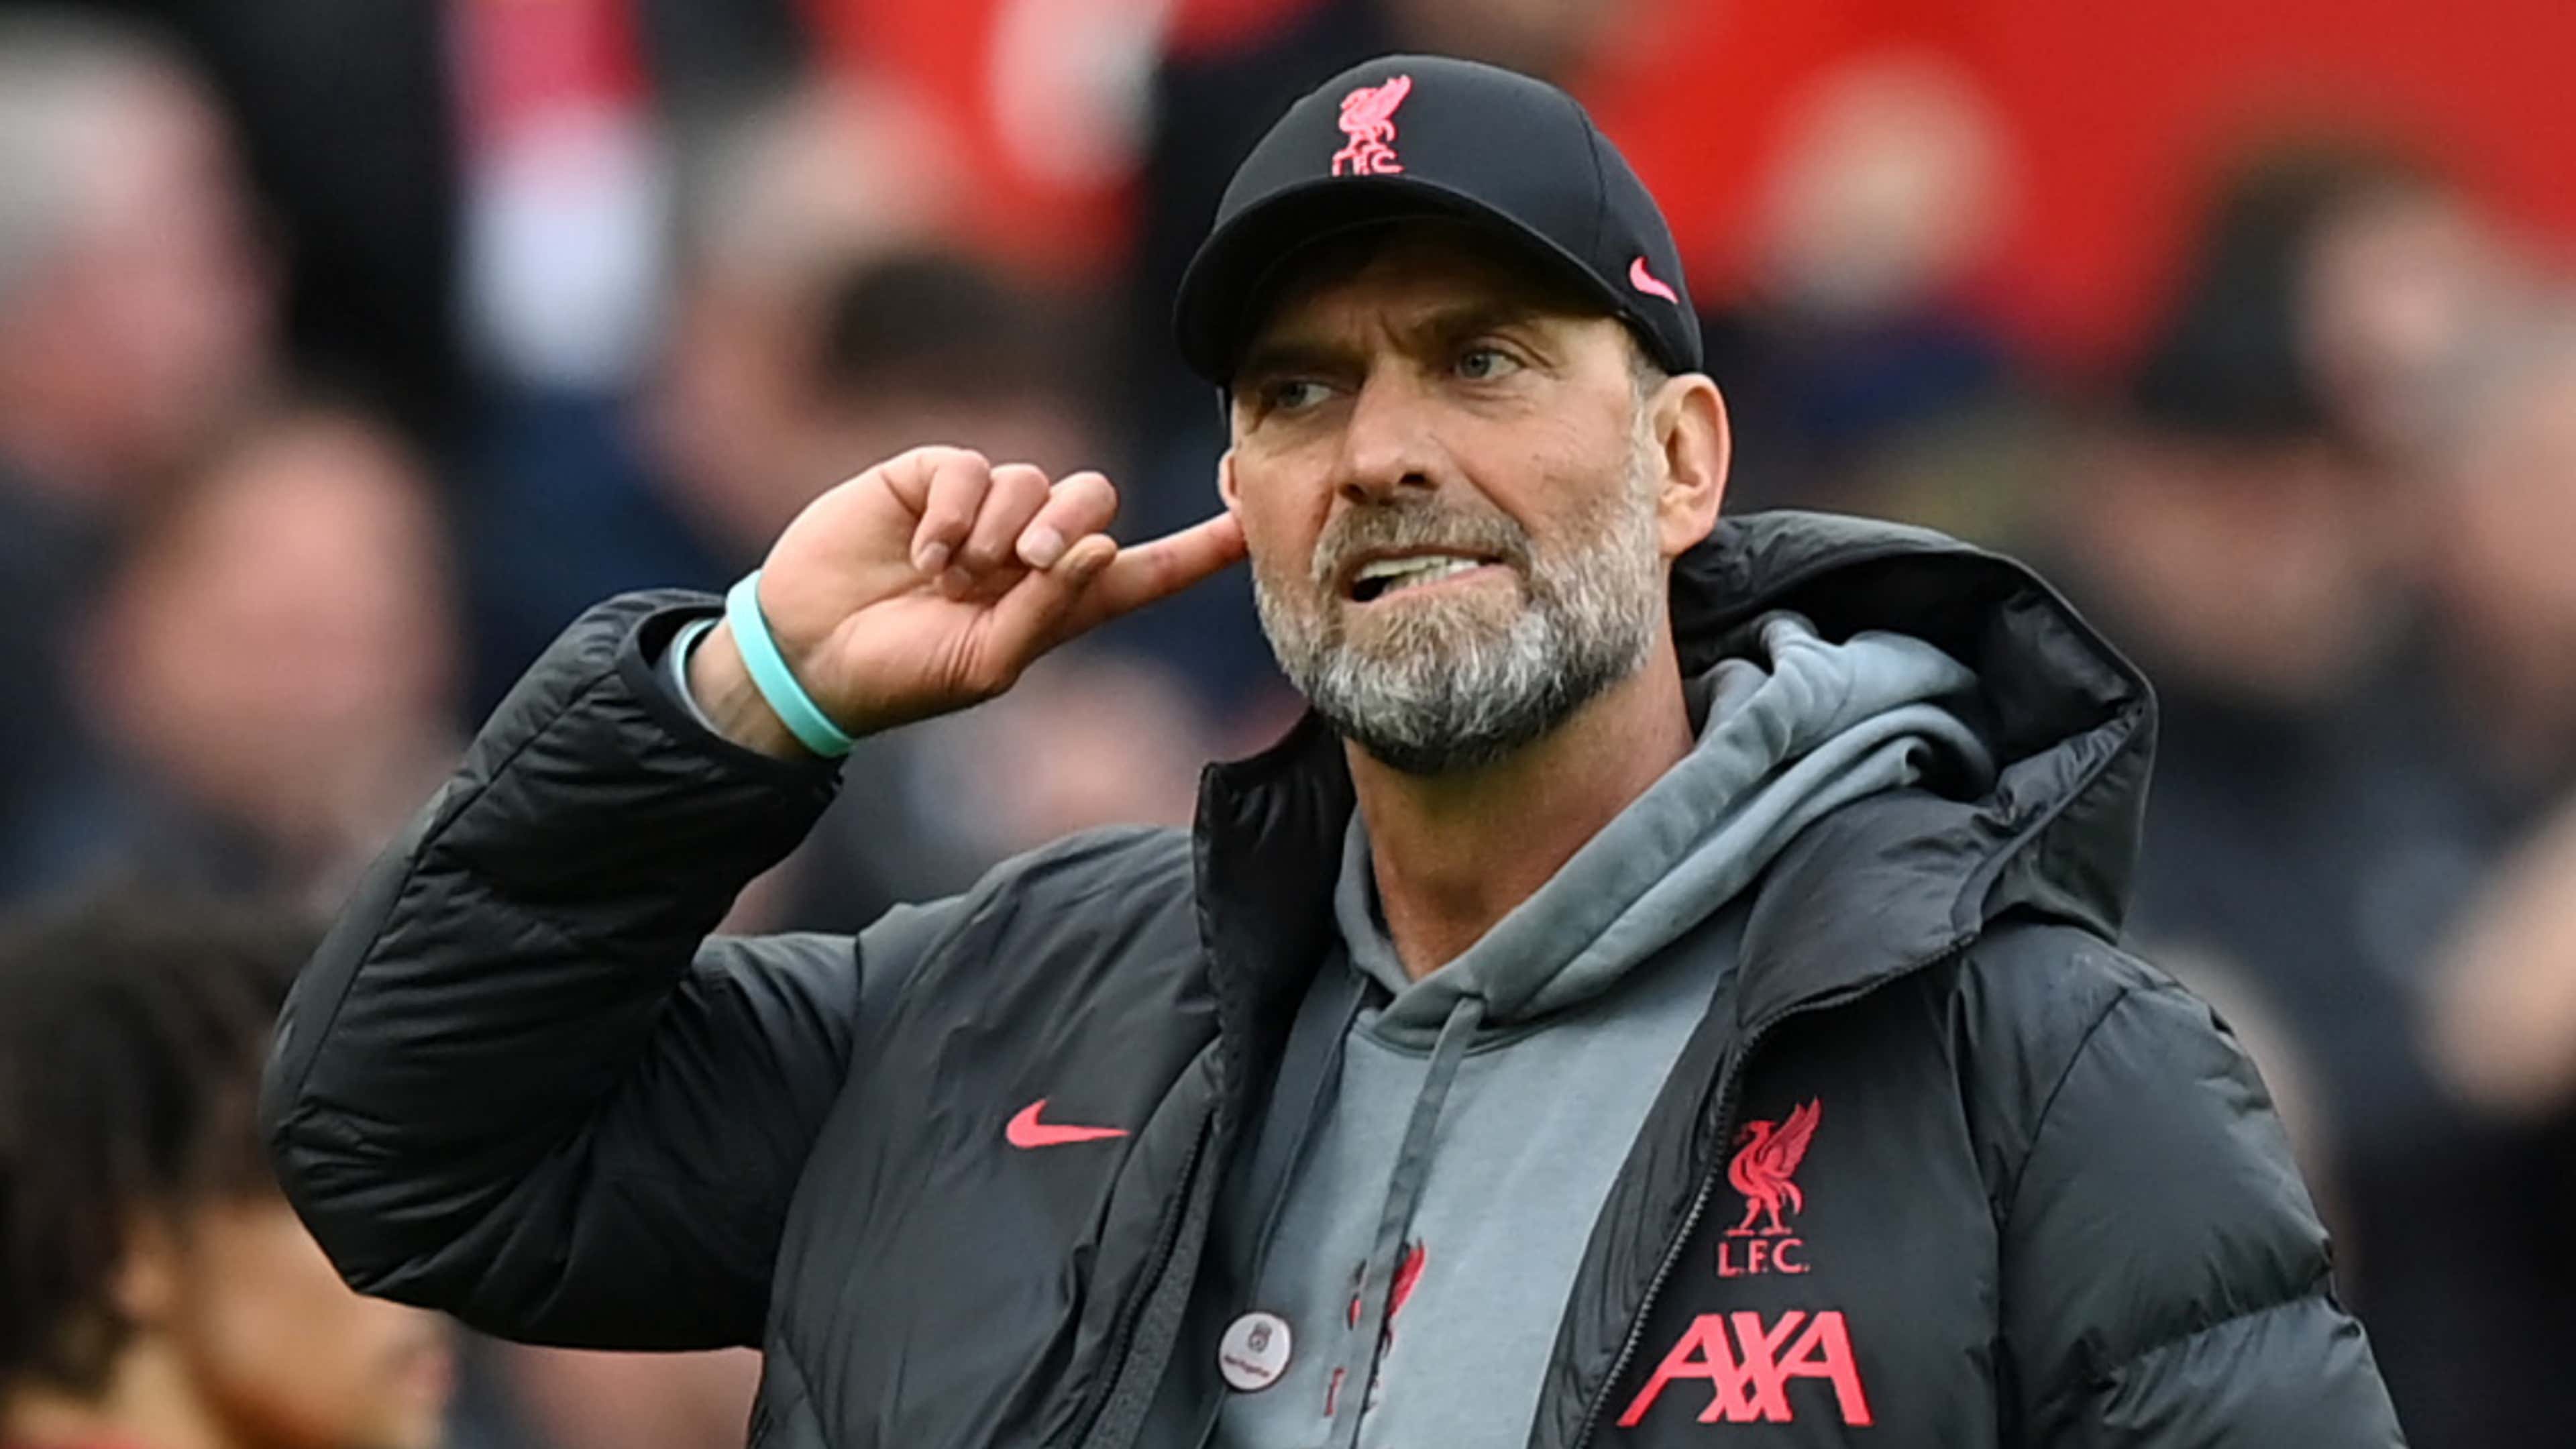 Gary Neville makes 'selfish' claim about outgoing Liverpool manager Jurgen Klopp.